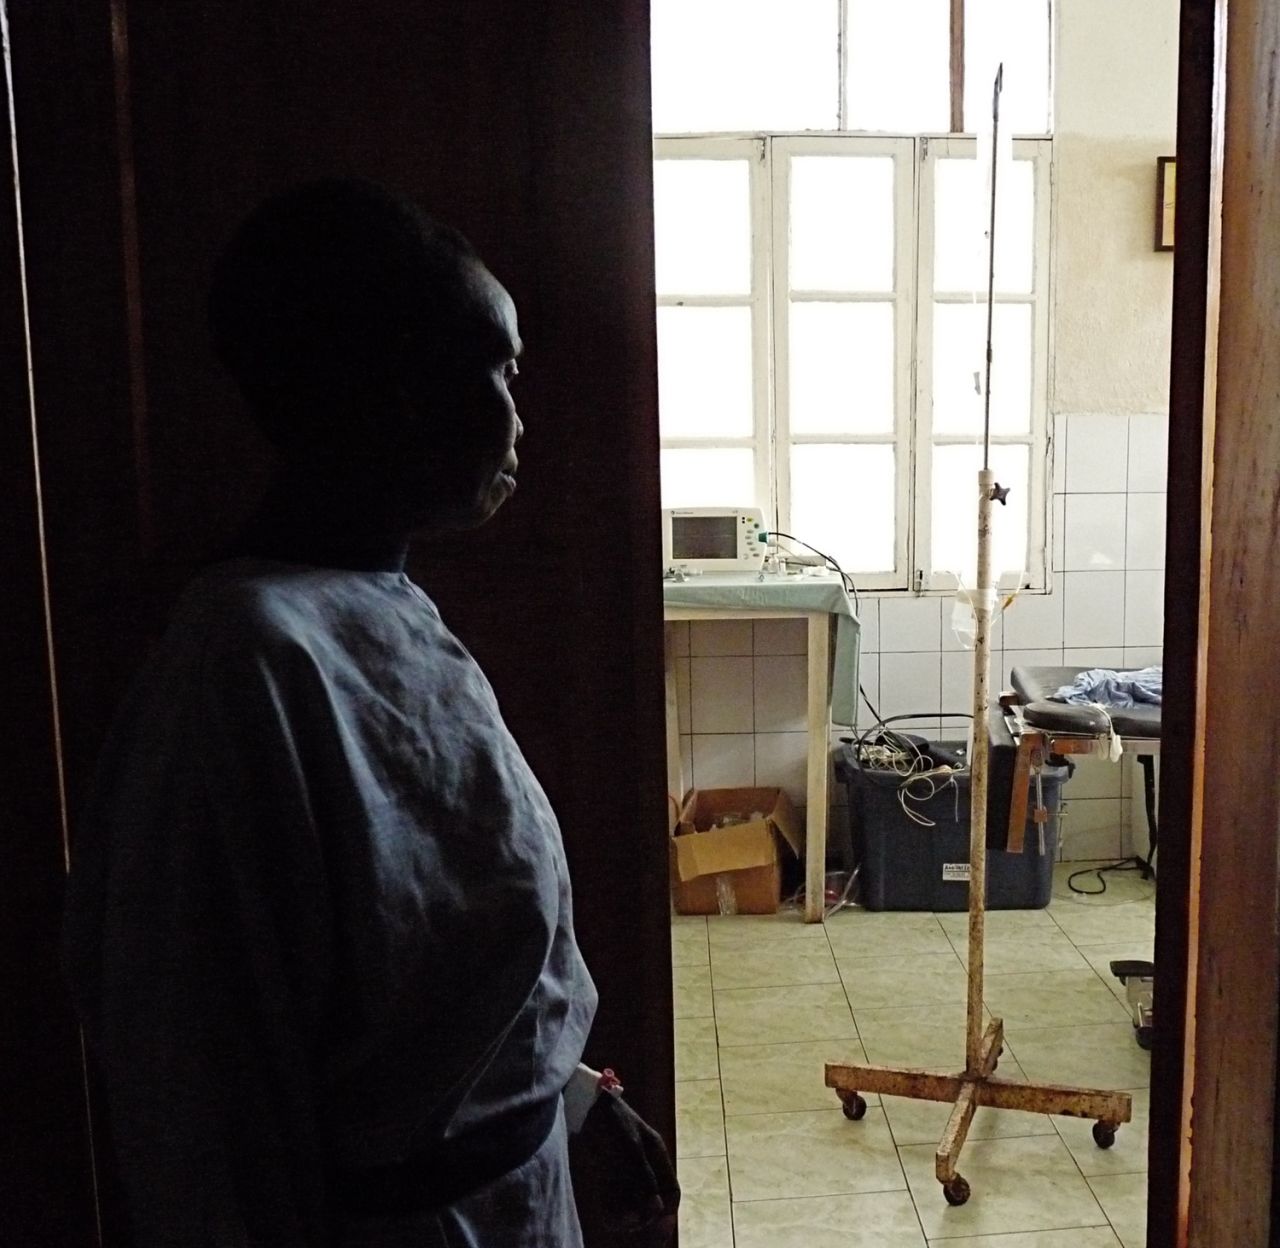 This woman, who has suffered from fistula for 20 years, watches as staff prepare for her surgery.